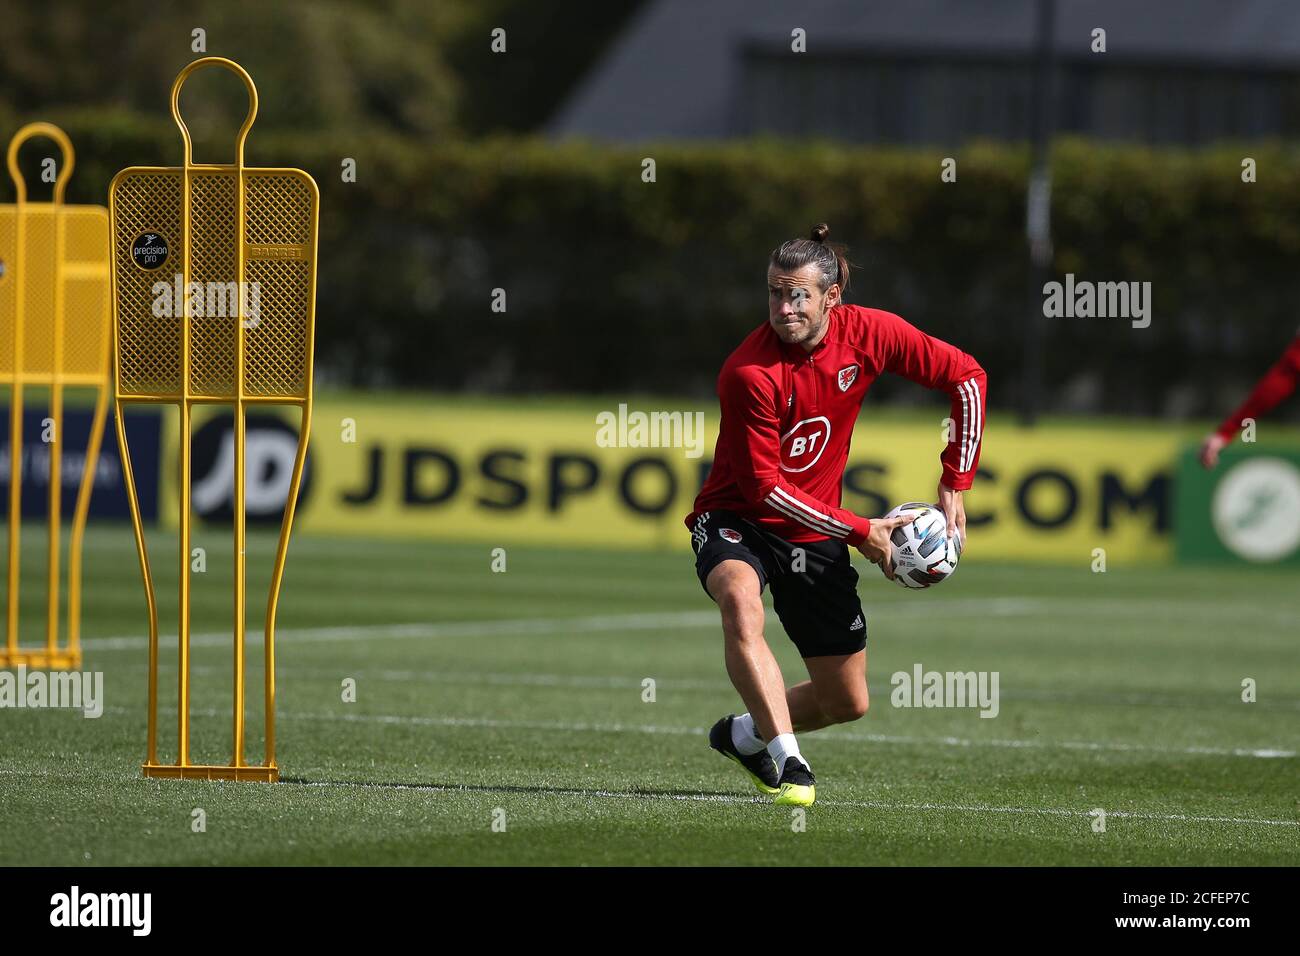 Gareth Bale of Wales passes the ball like a Rugby scrum-half during the  Wales football team training session at the Vale Resort, Hensol, near  Cardiff on Saturday 5th September 2020. The team